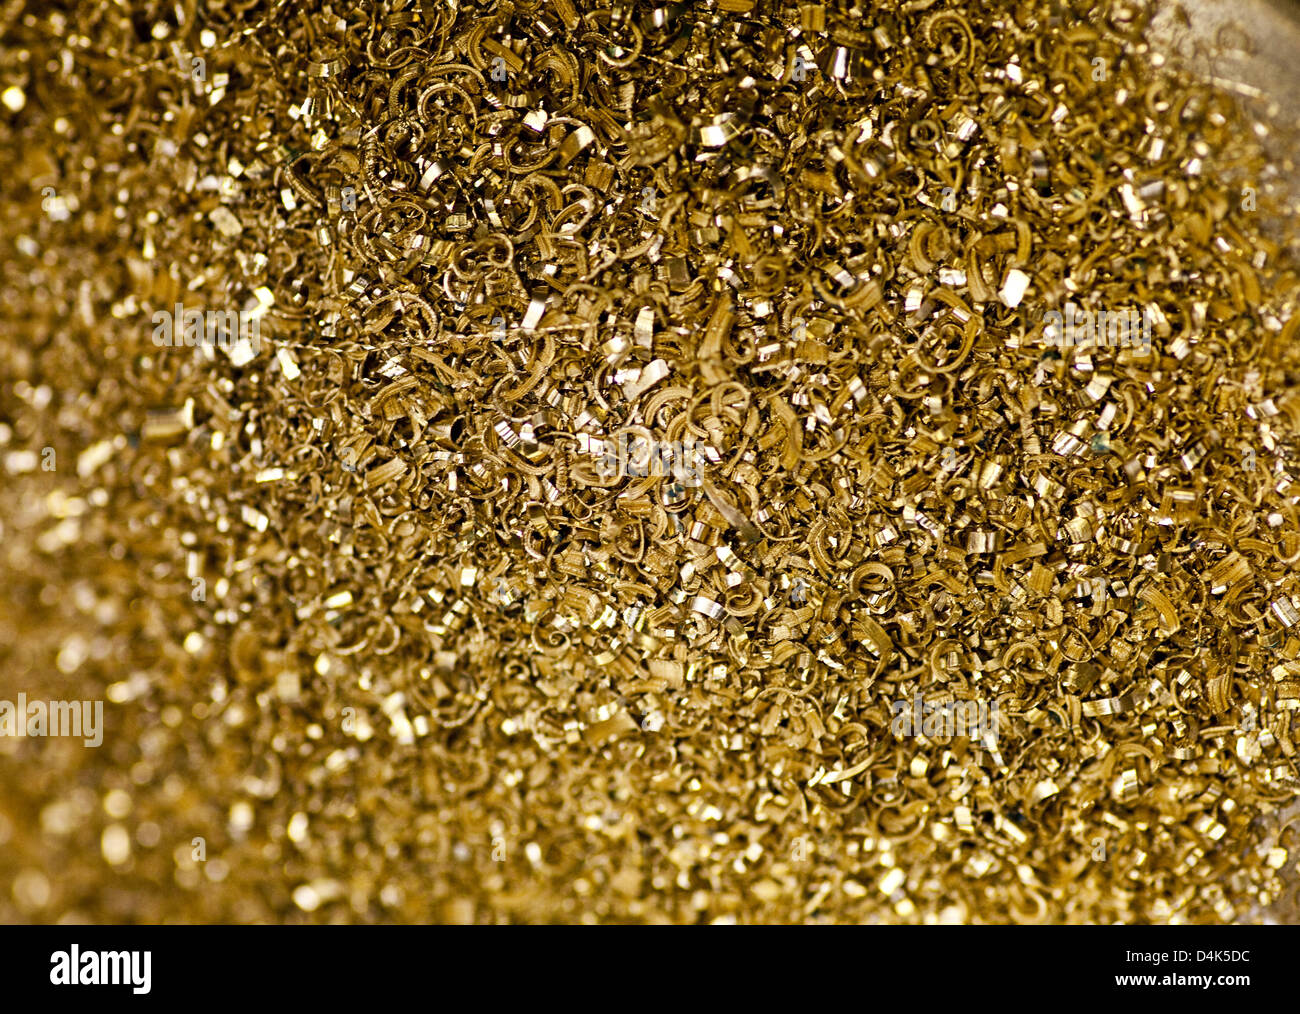 The picture shows gold granule that was melted from old gold at the Heraeus gold workmanship in Hanau, Germany, 26 March 2009. Gold granule can conveniently be manufactured into jewellery. Photo: Frank Rumpenhorst Stock Photo